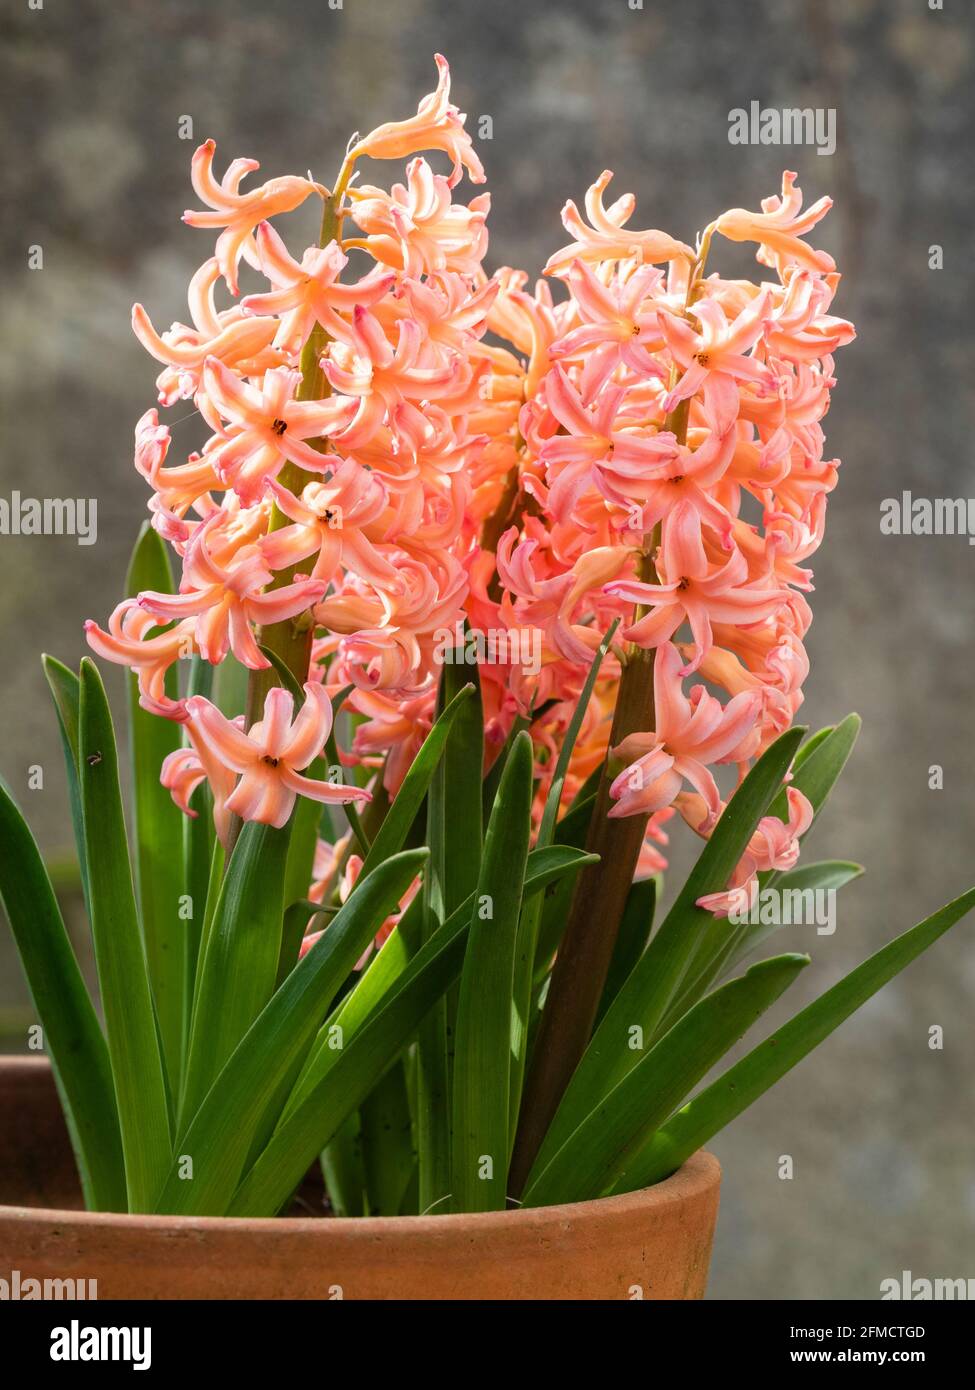 Dense racemes of peach flowers of the spring blooming hardy bulb hyacinth, Hyacinthus orientalis 'Gipsy Queen' Stock Photo